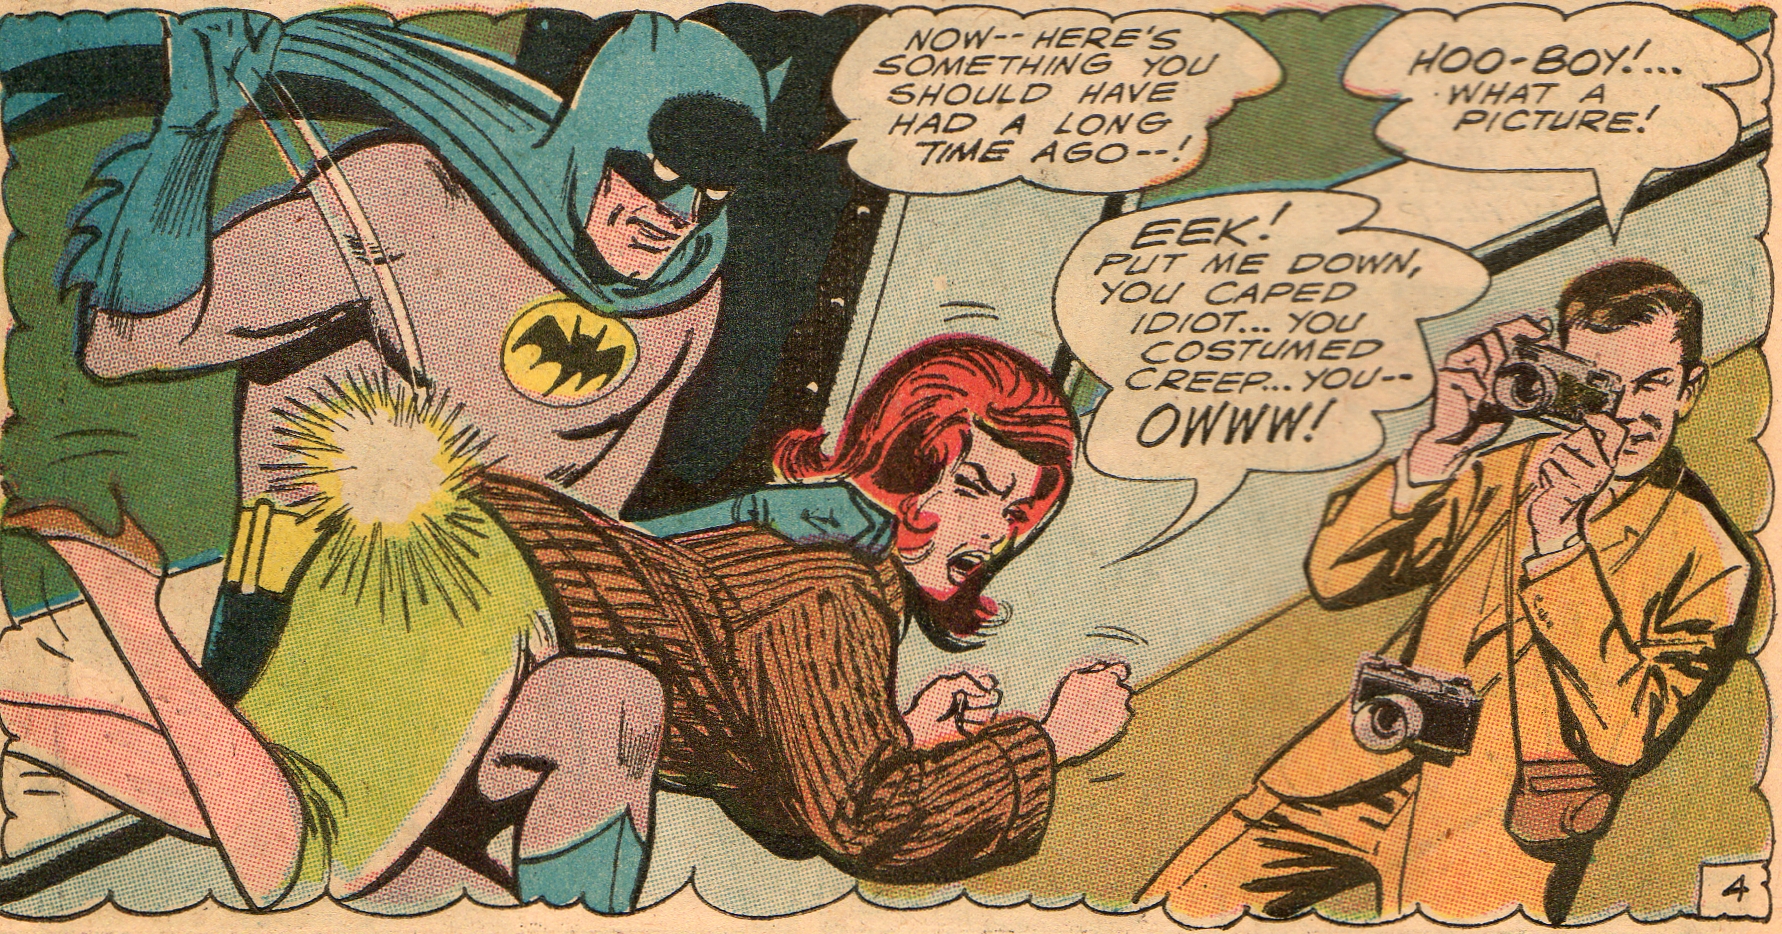 original version of Batman spanking Marcia in brave and the bold #64